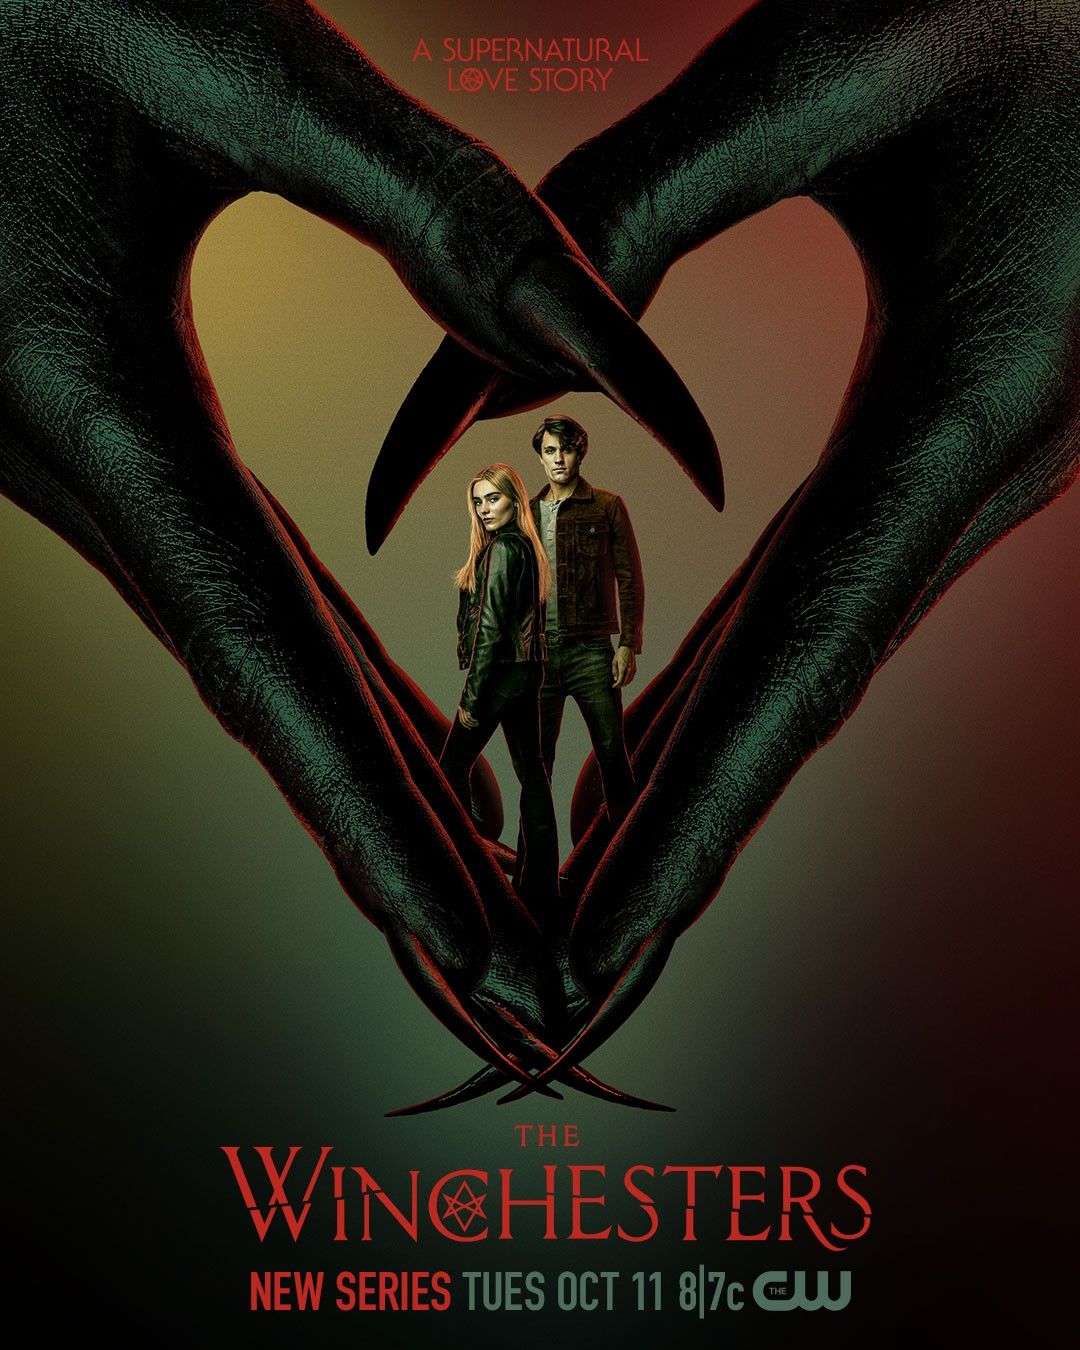 The Winchesters CW series poster